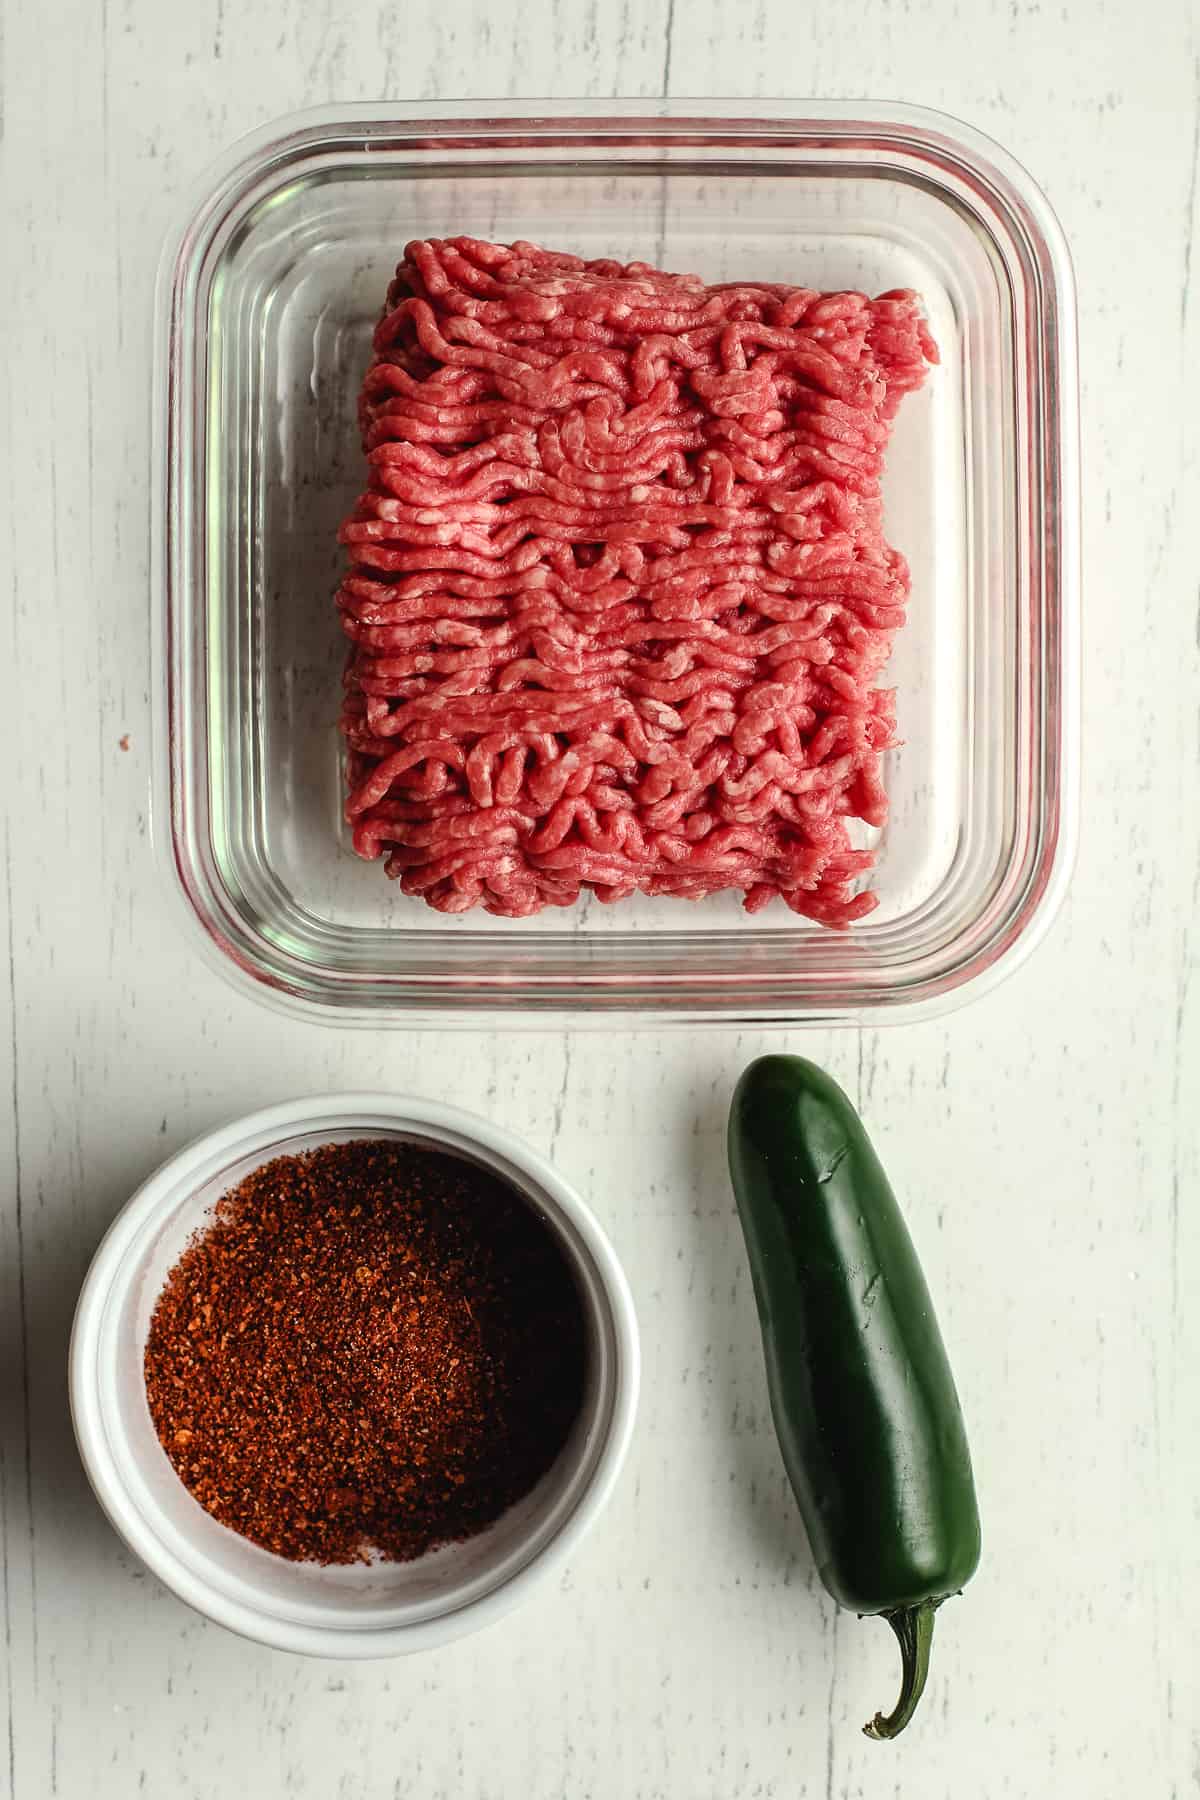 Ingredients for the taco meat - beef, taco seasoning, and jalapeño.